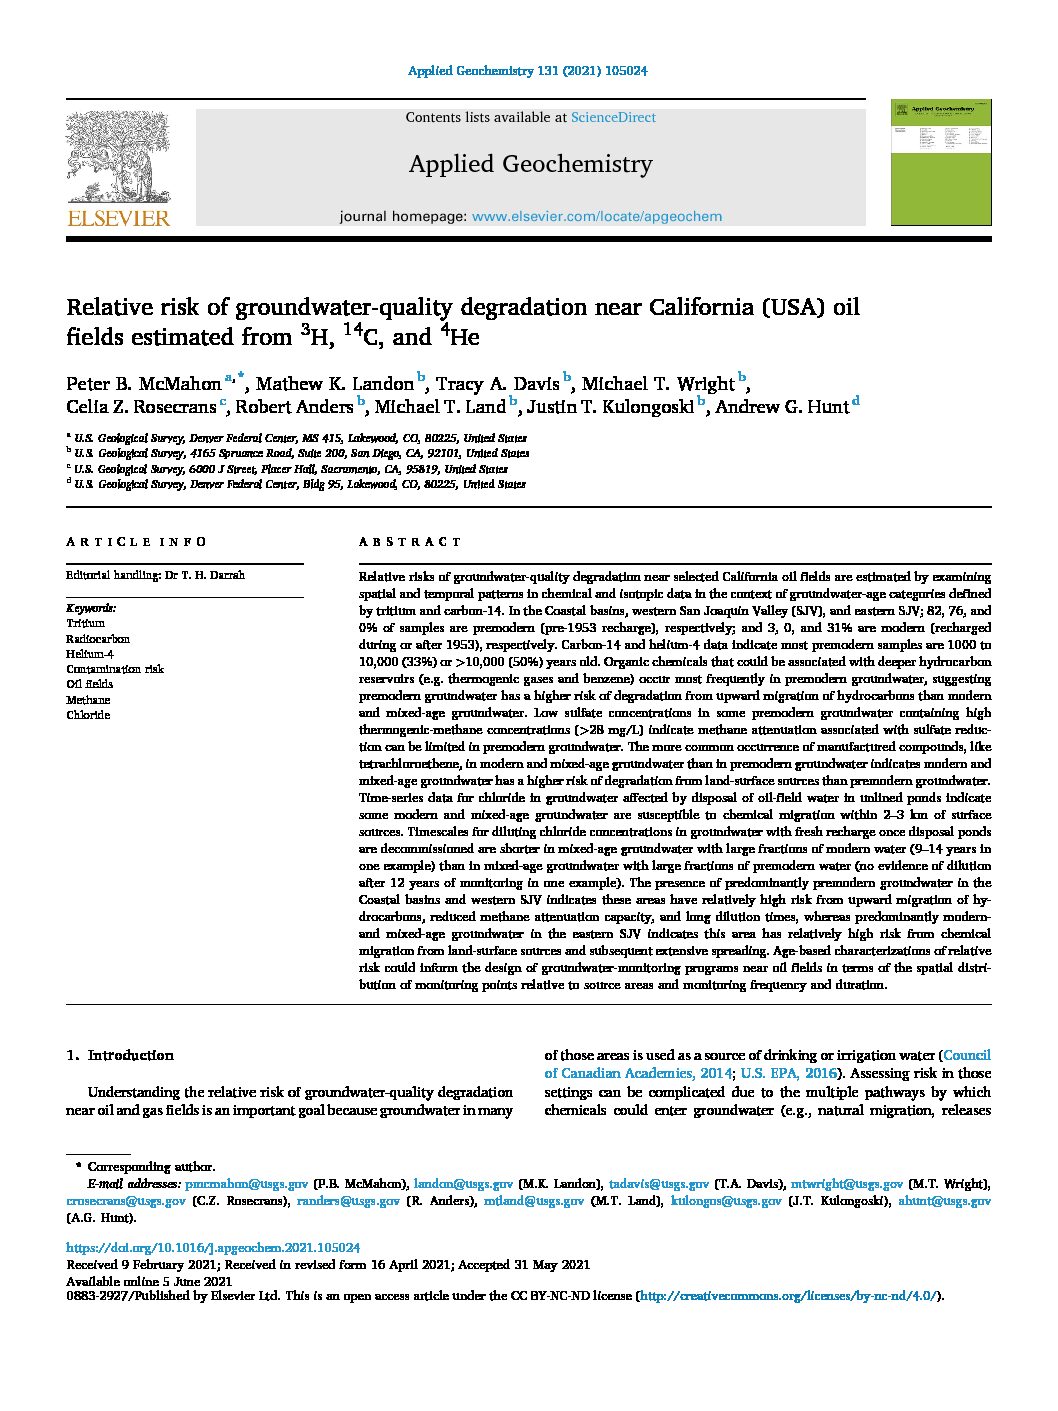 Relative risk of groundwater-quality degradation near California (USA) oil fields estimated from 3H, 14C, and 4He